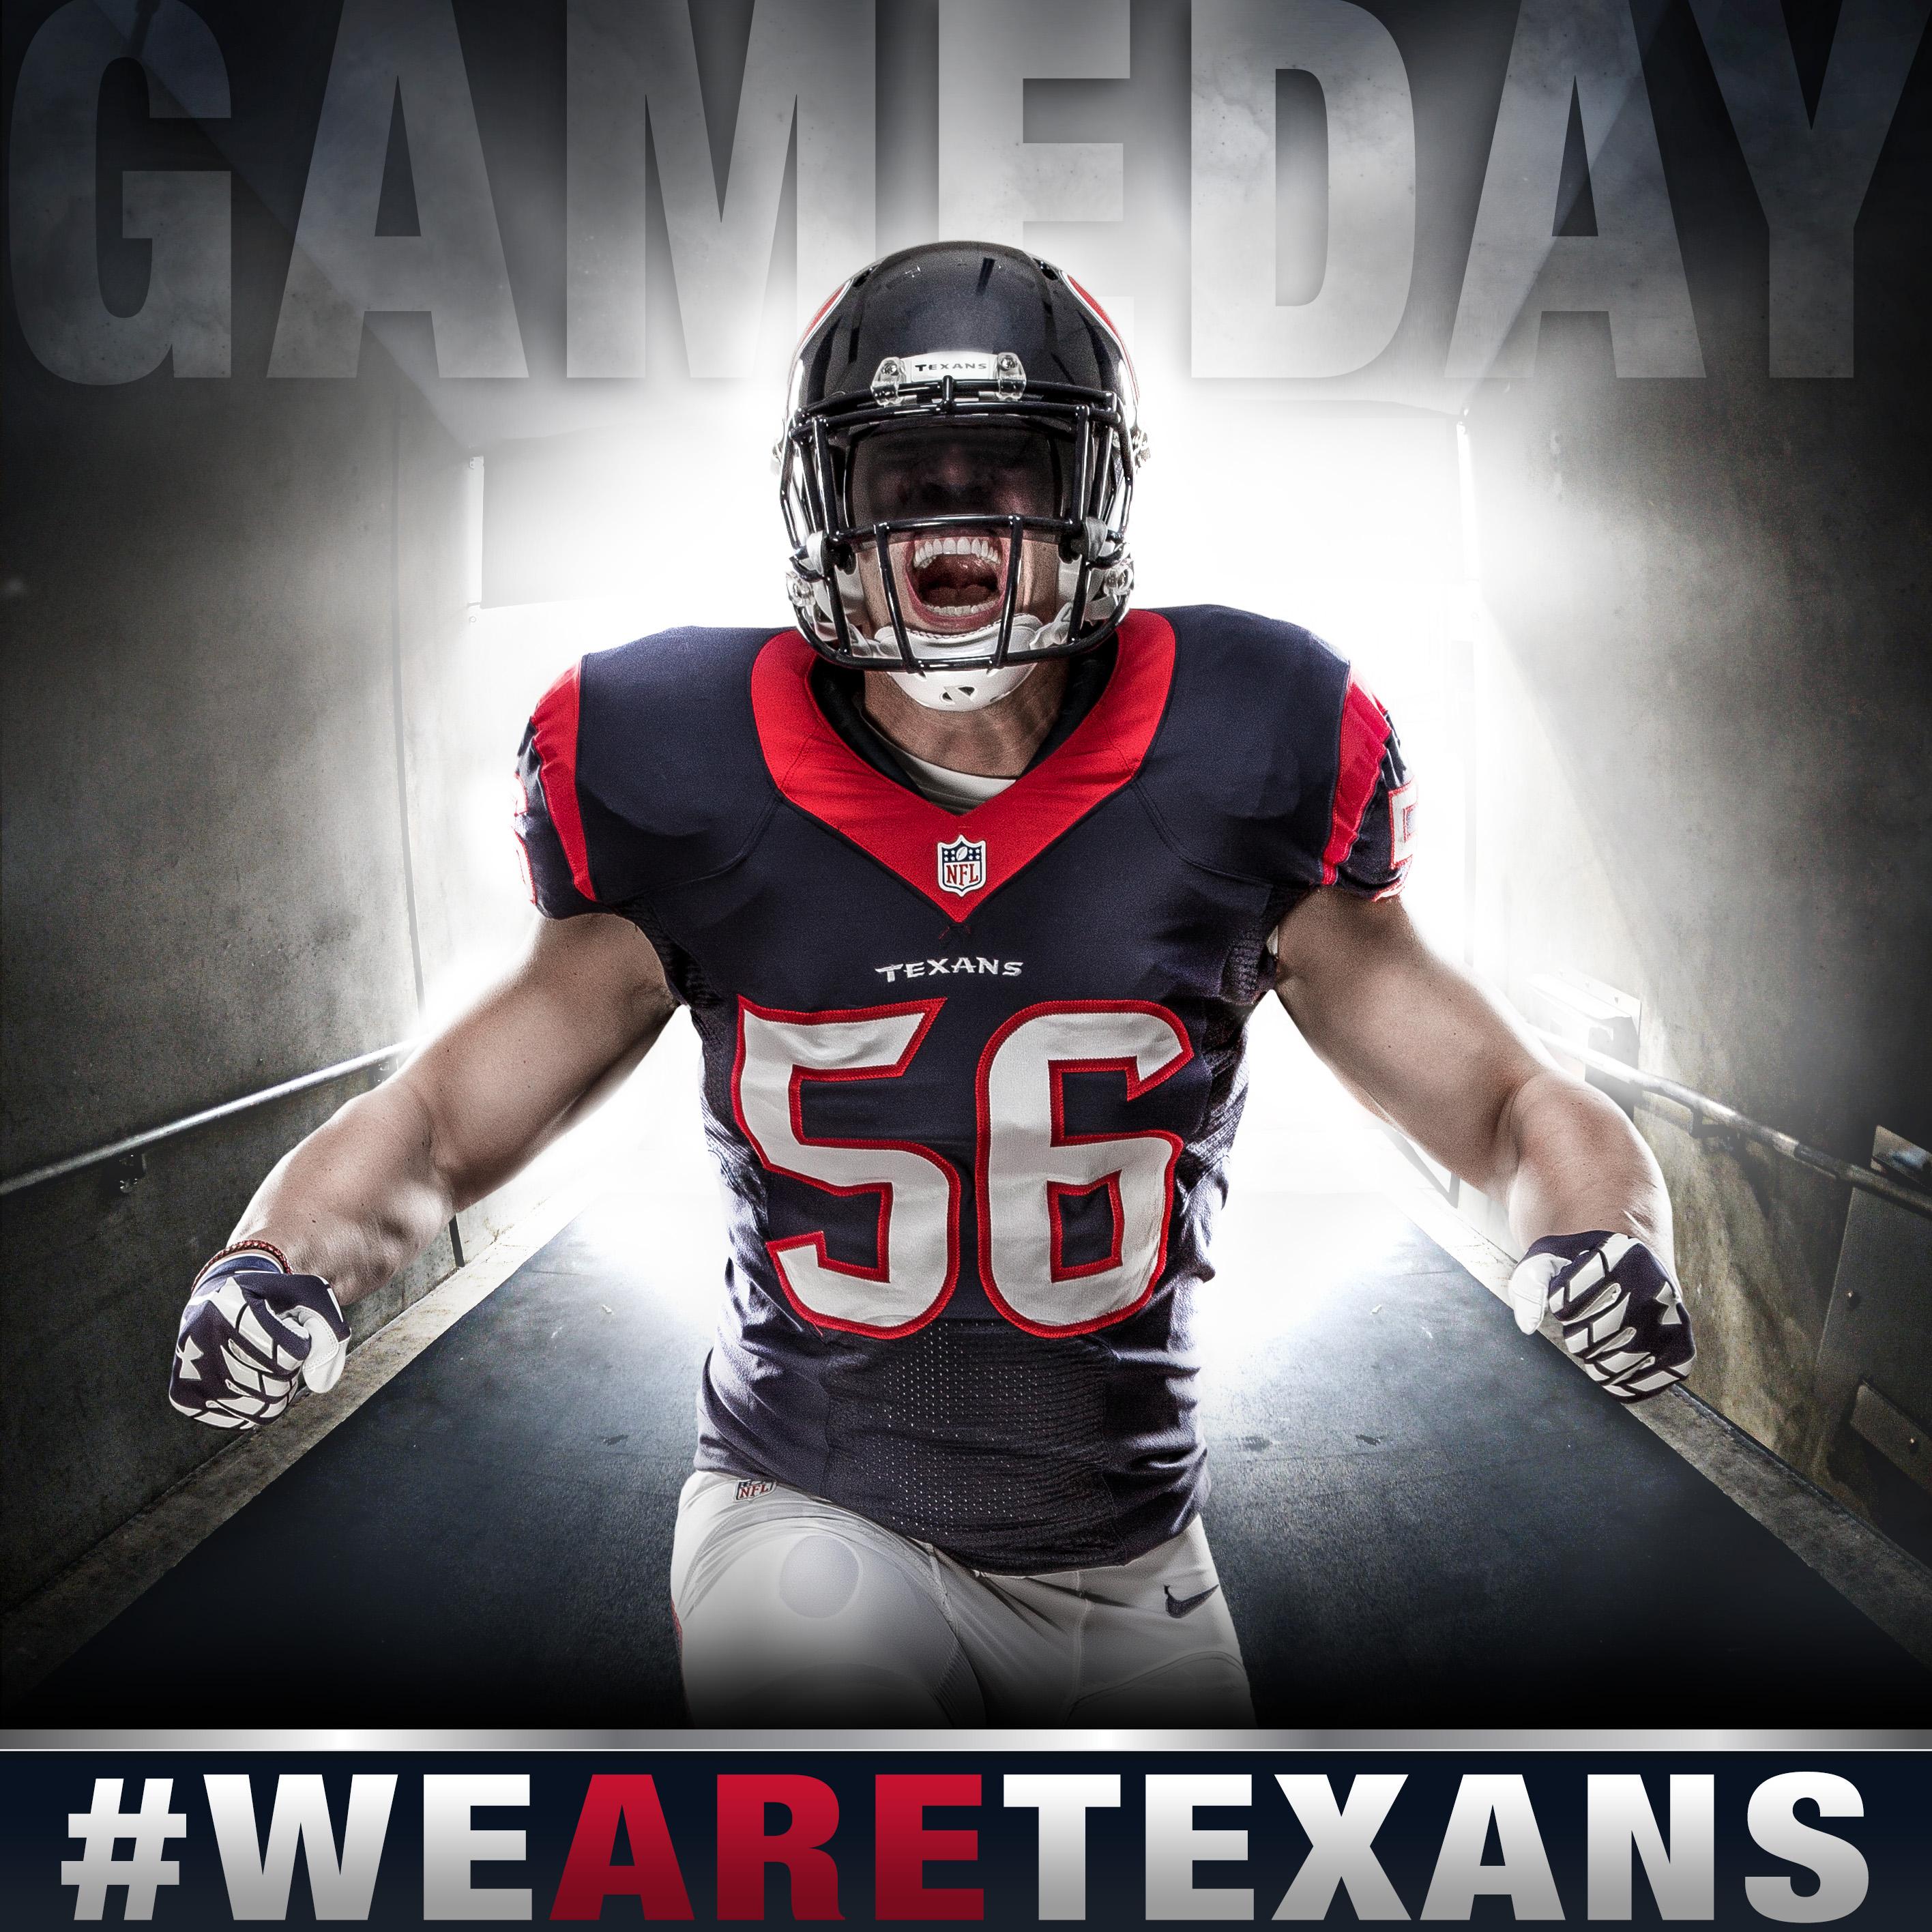 texans game day schedule